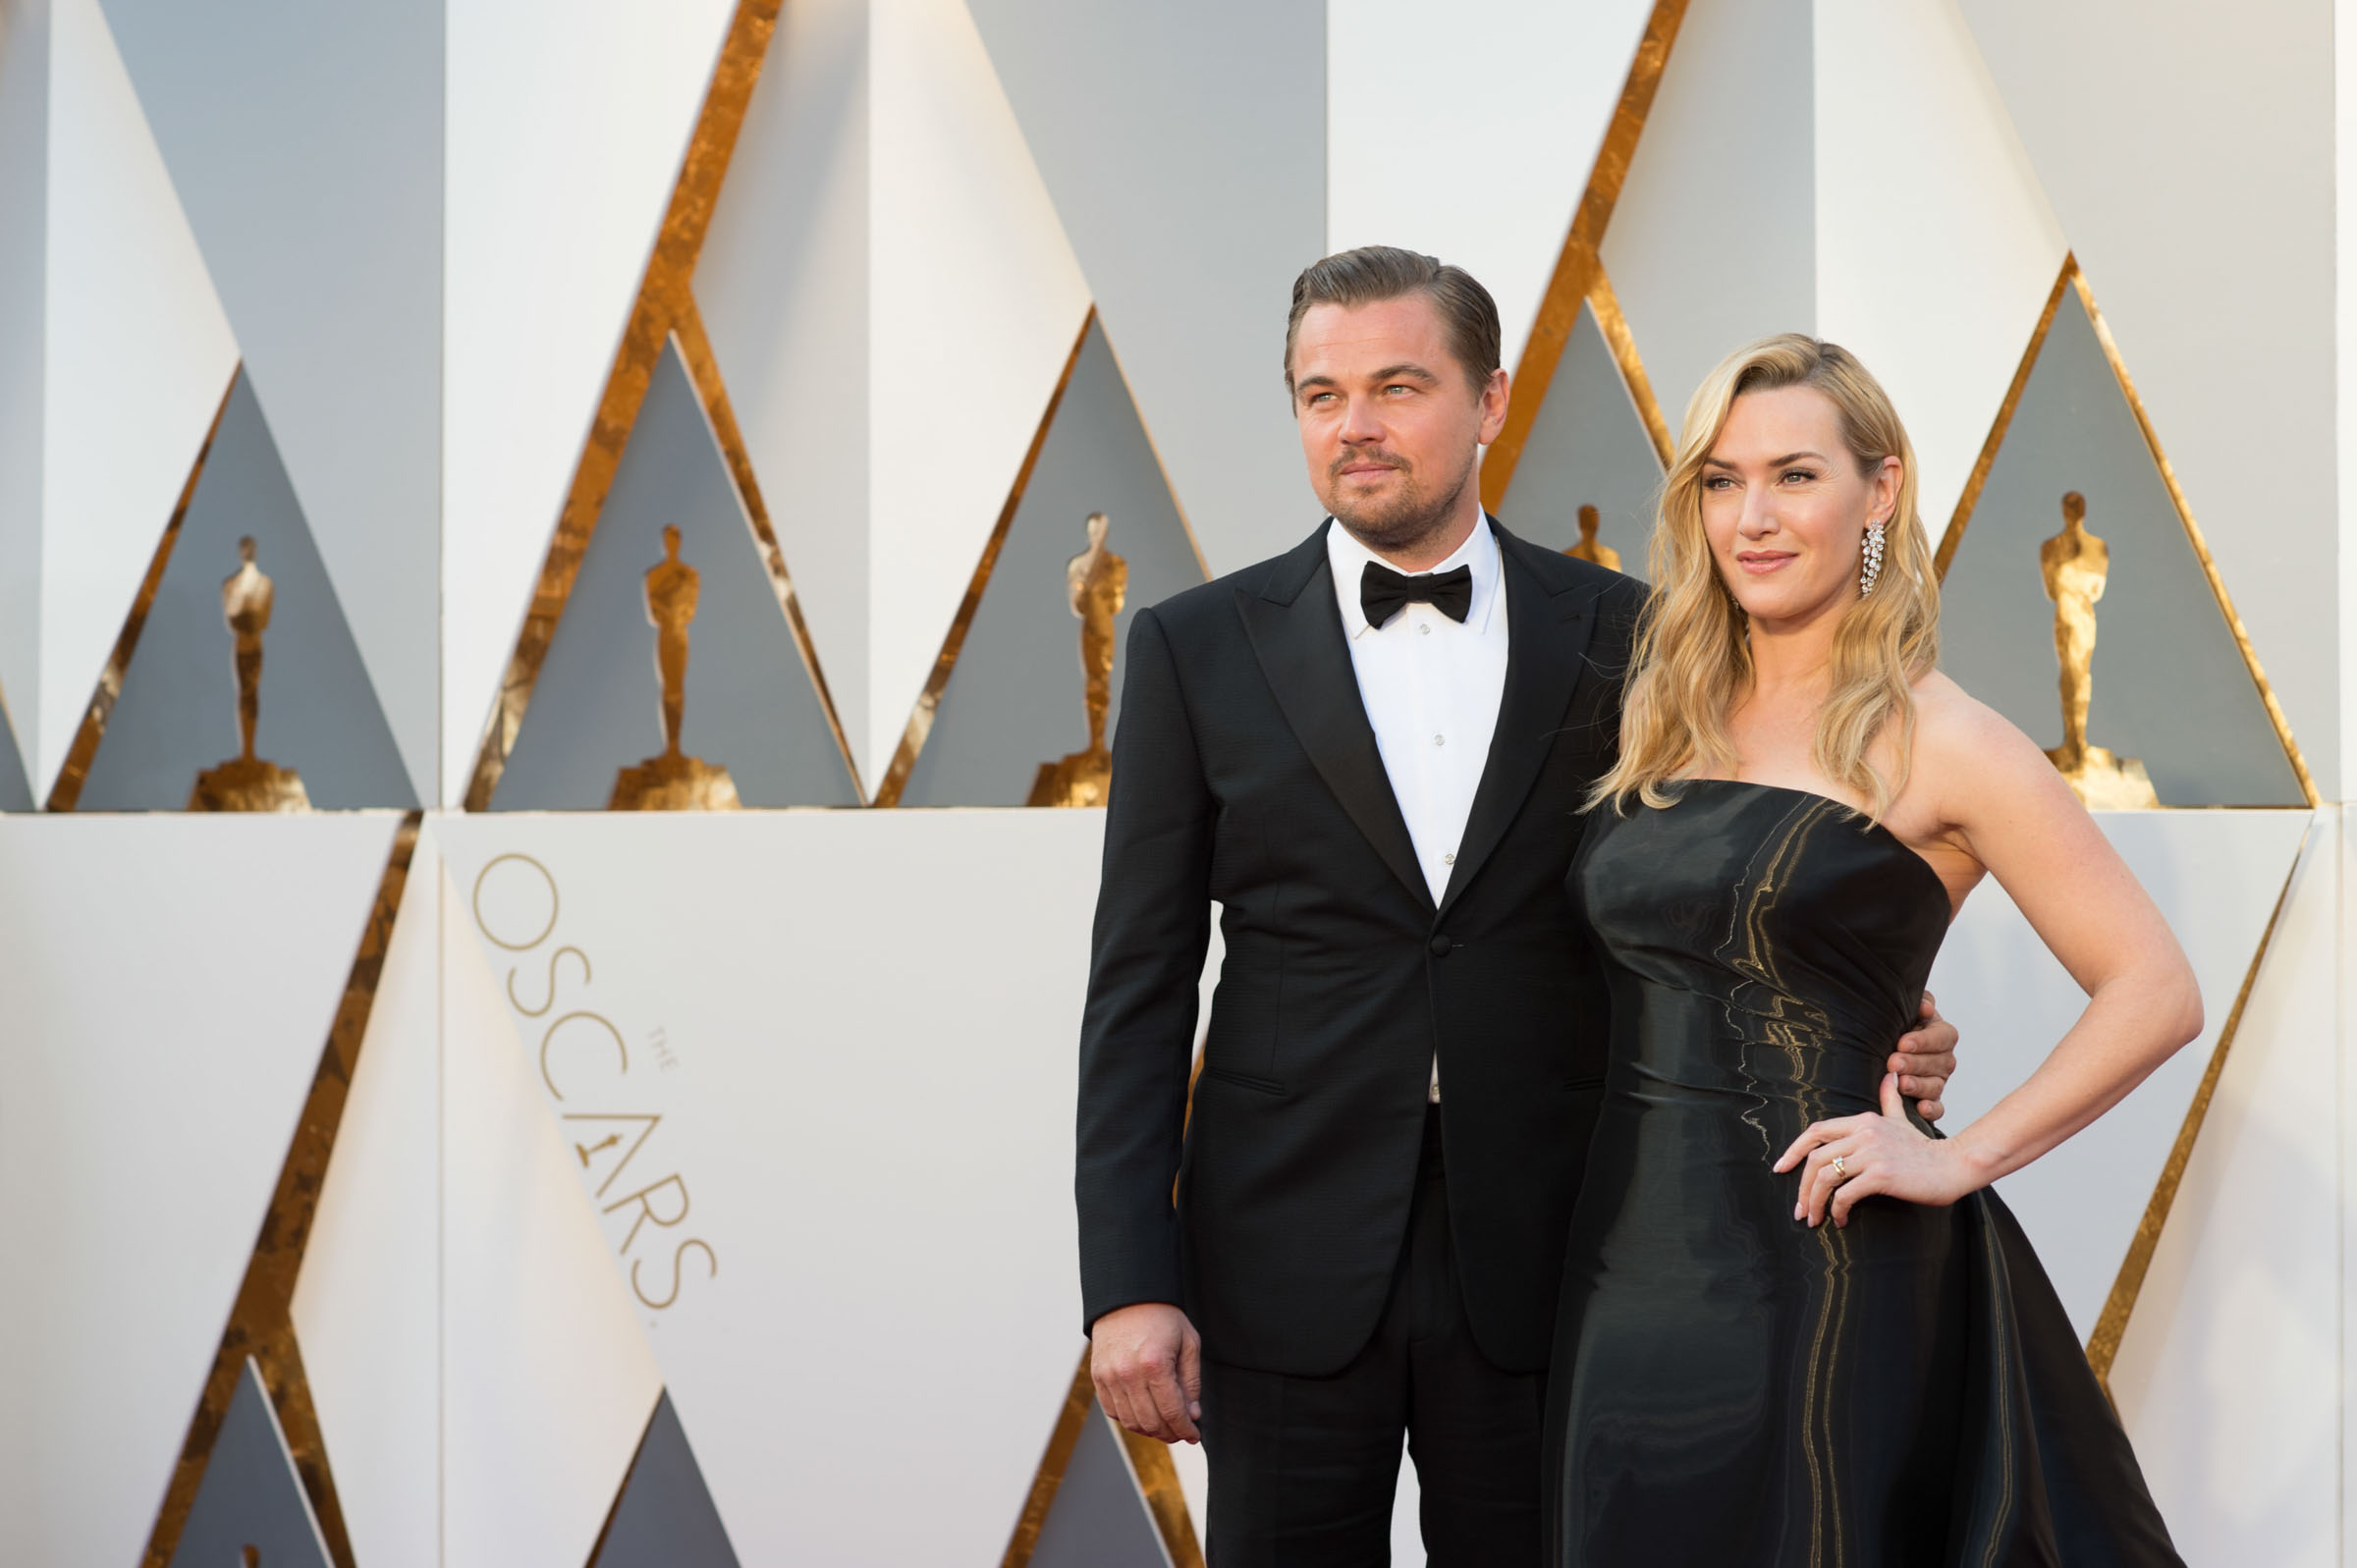 Oscar®-nominees Leonardo DiCaprio and Kate Winslet arrive at The 88th Oscars® at the Dolby® Theatre in Hollywood, CA on Sunday, February 28, 2016. Photo Credit: Aaron Poole / ©A.M.P.A.S.